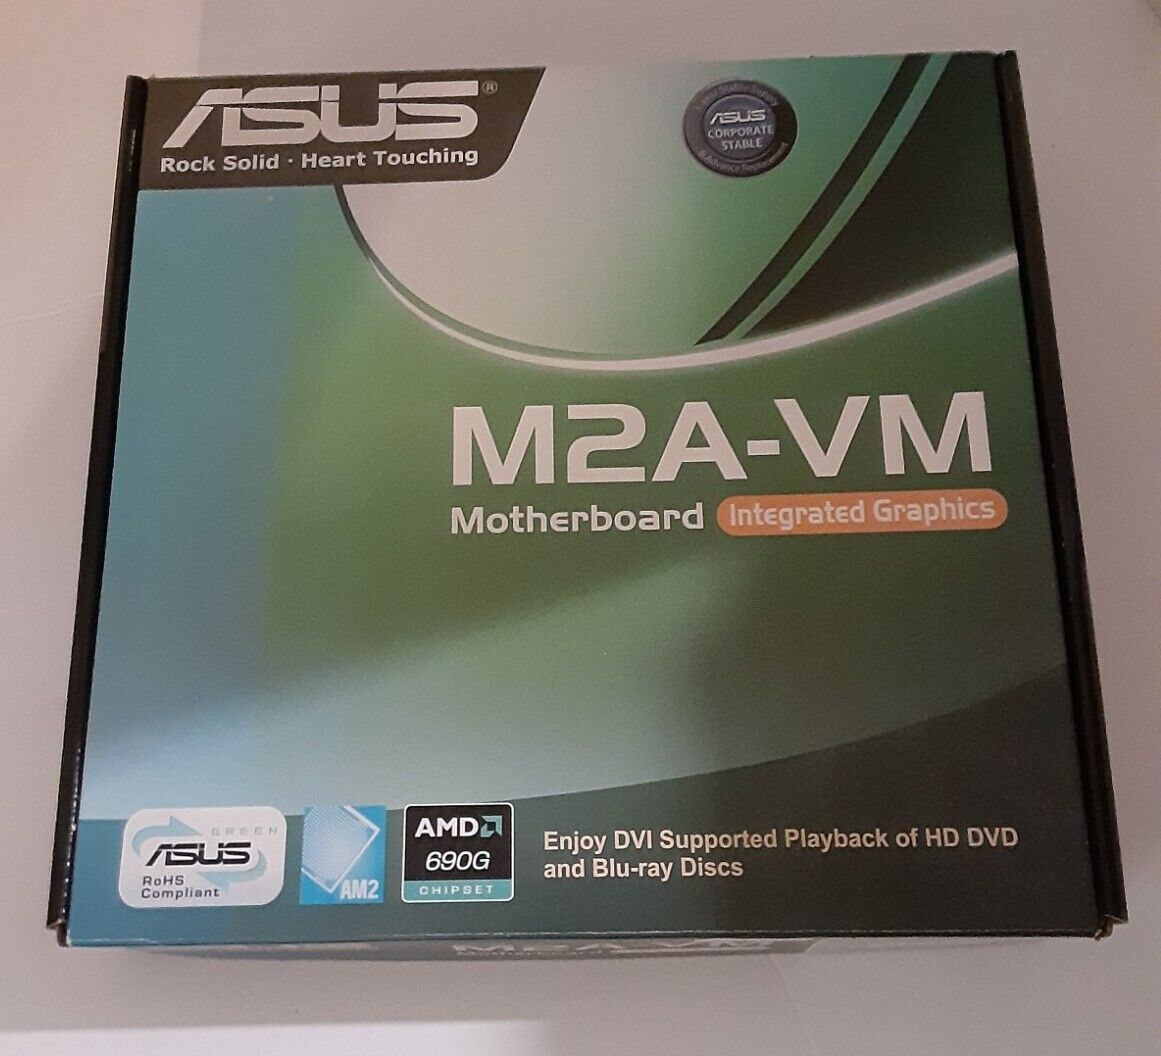 ASUS M2A-VM Motherboard Integrated Graphics